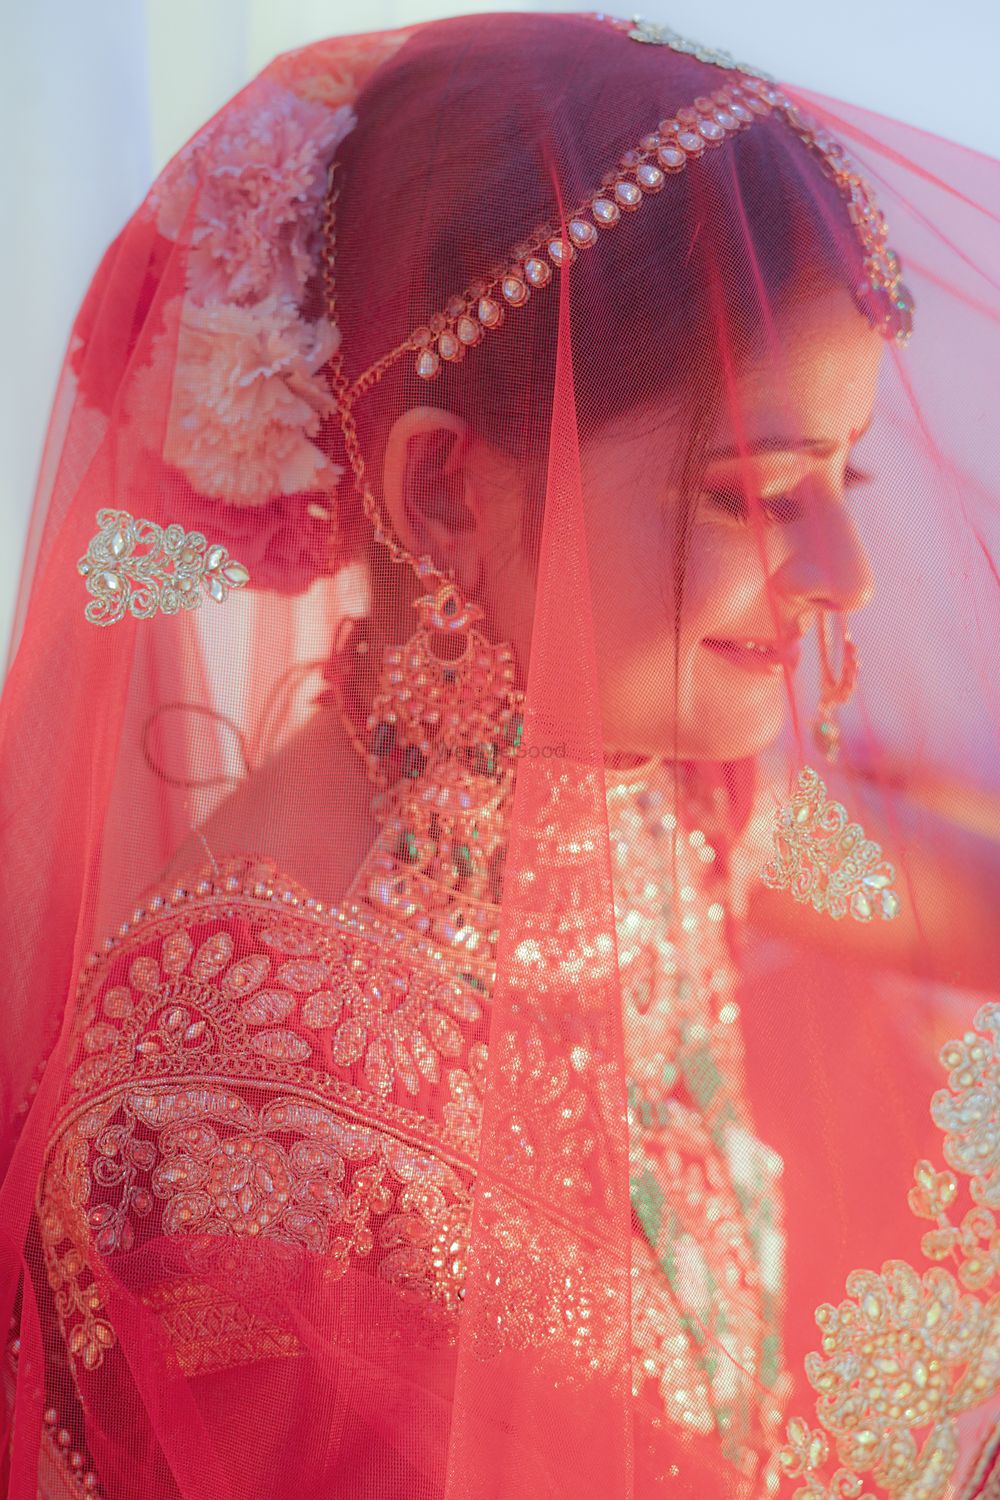 Photo By Anuja Paul Makeovers - Bridal Makeup